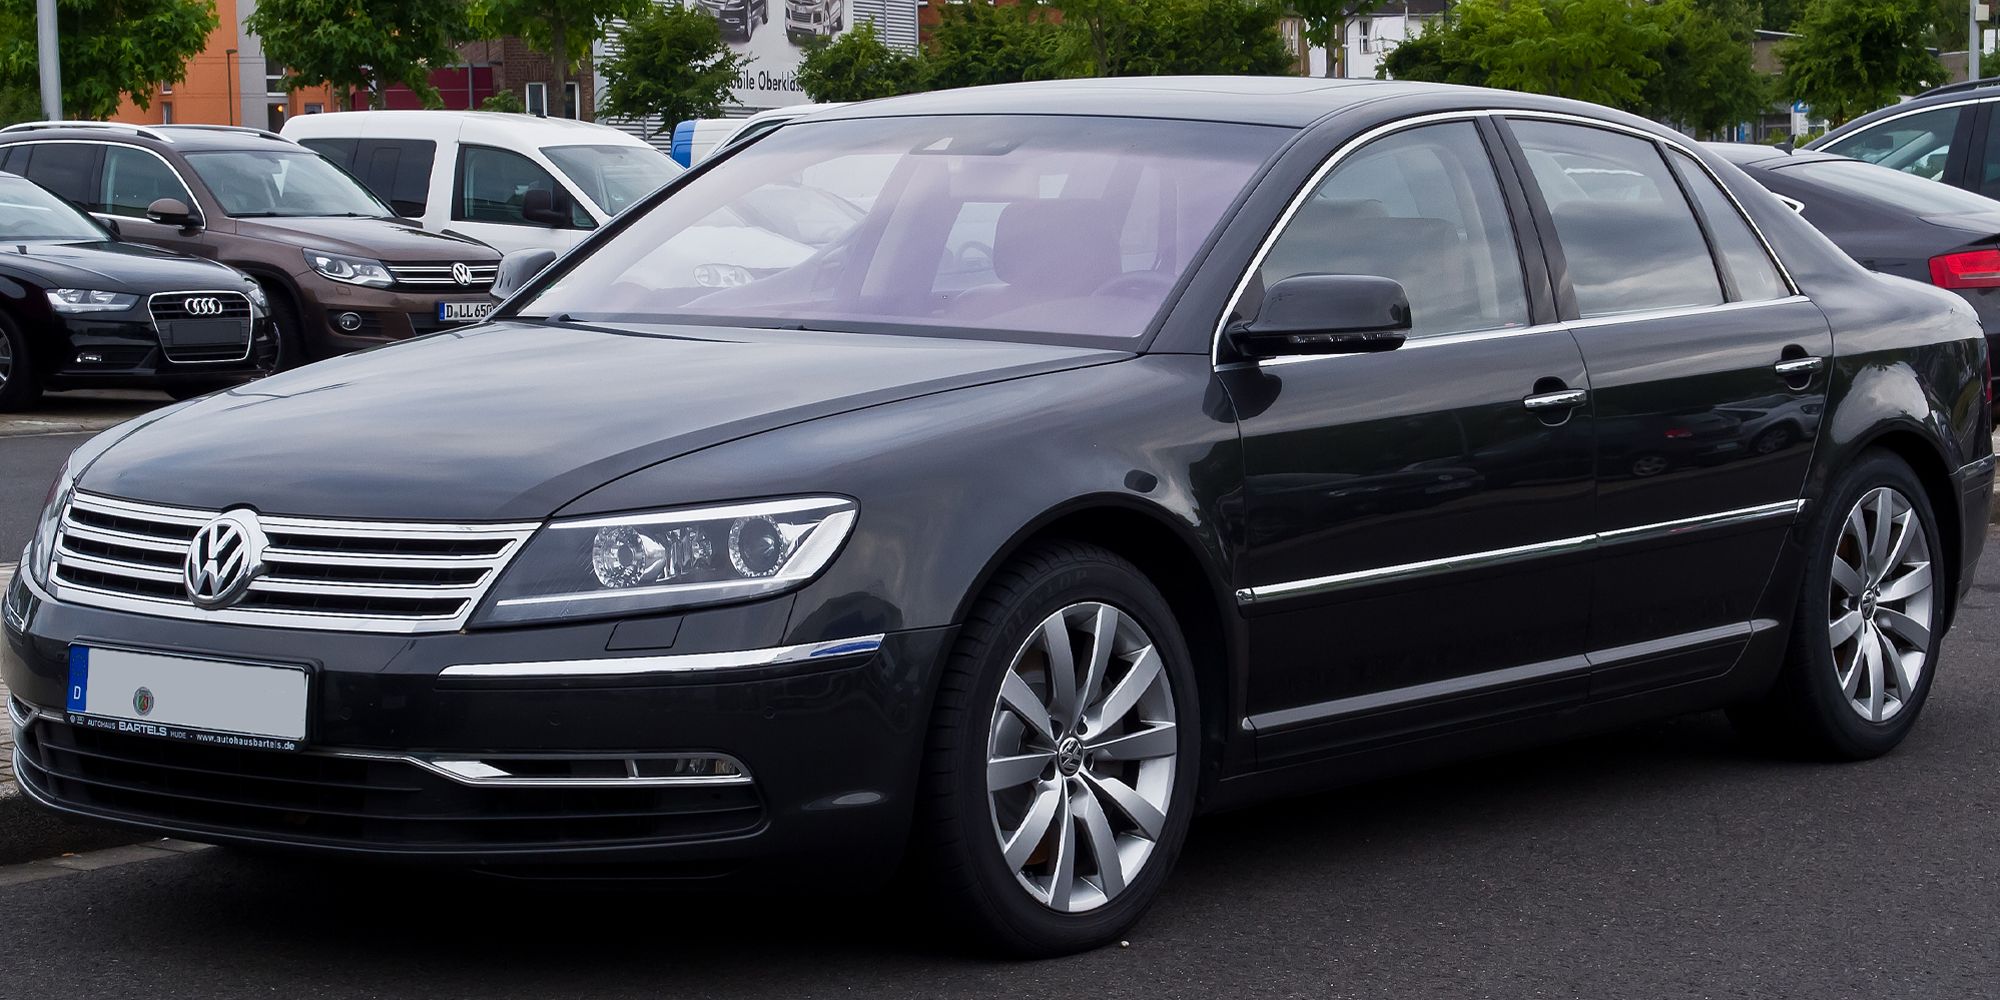 Front 3/4 view of the VW Phaeton